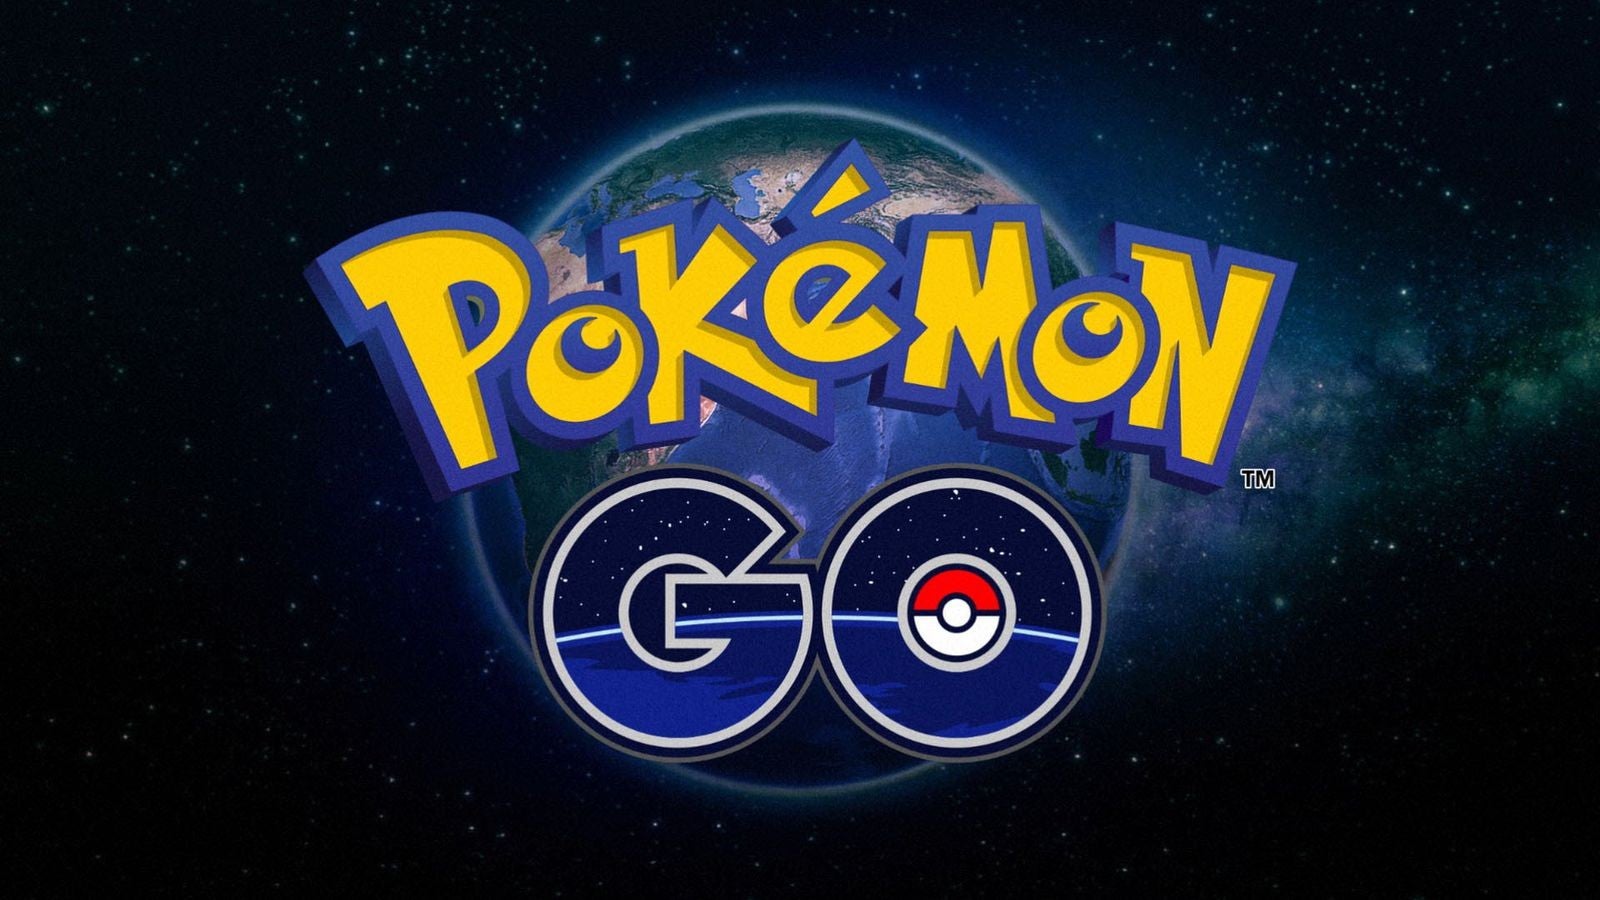 Pokemon Go’s newest update shows Niantic prepping for Gen 2 monsters